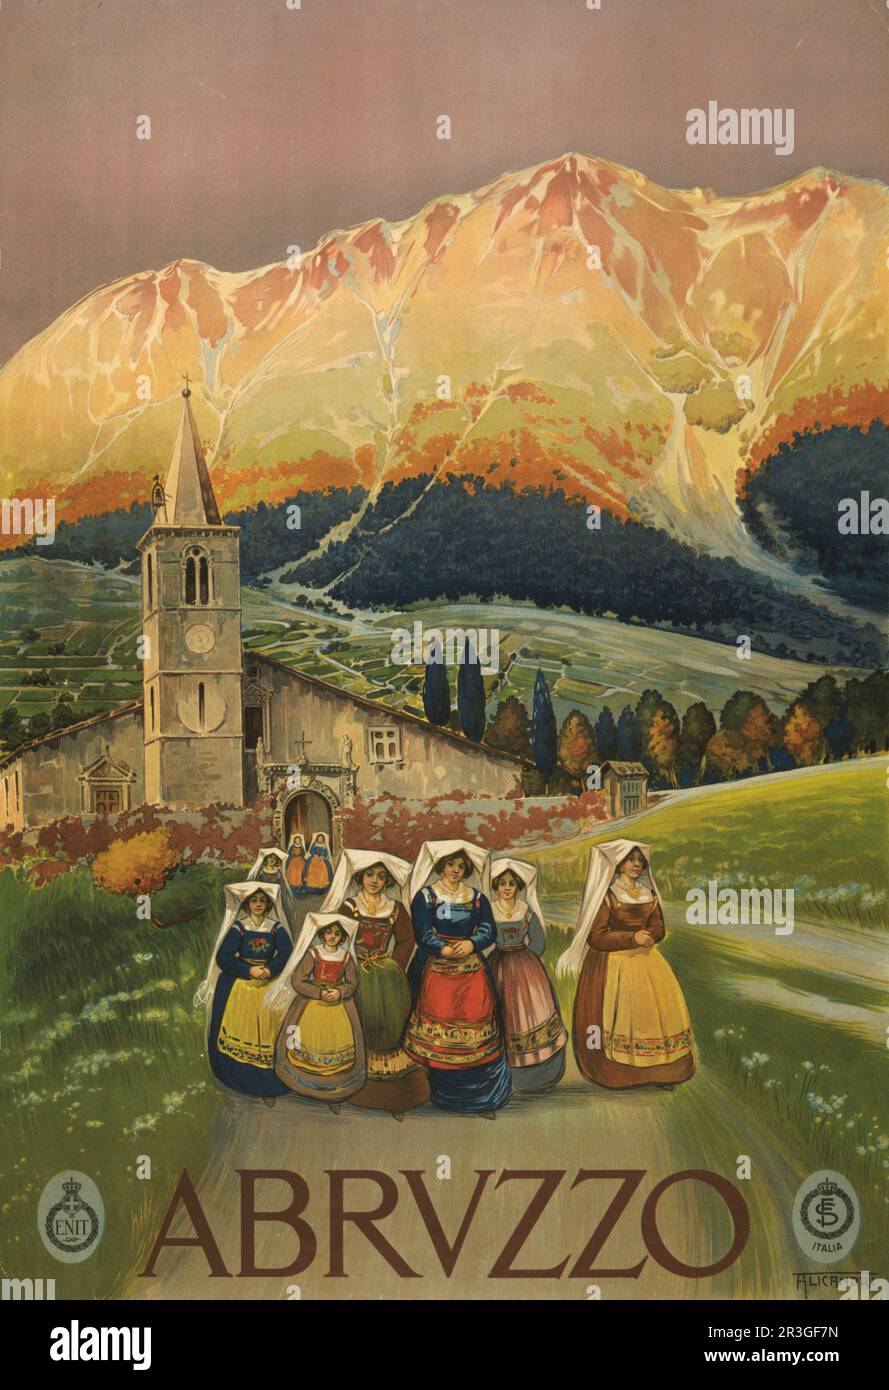 Abruzzo, Italy. Vintage travel poster showing a group of women leaving a church, circa 1920. Stock Photo